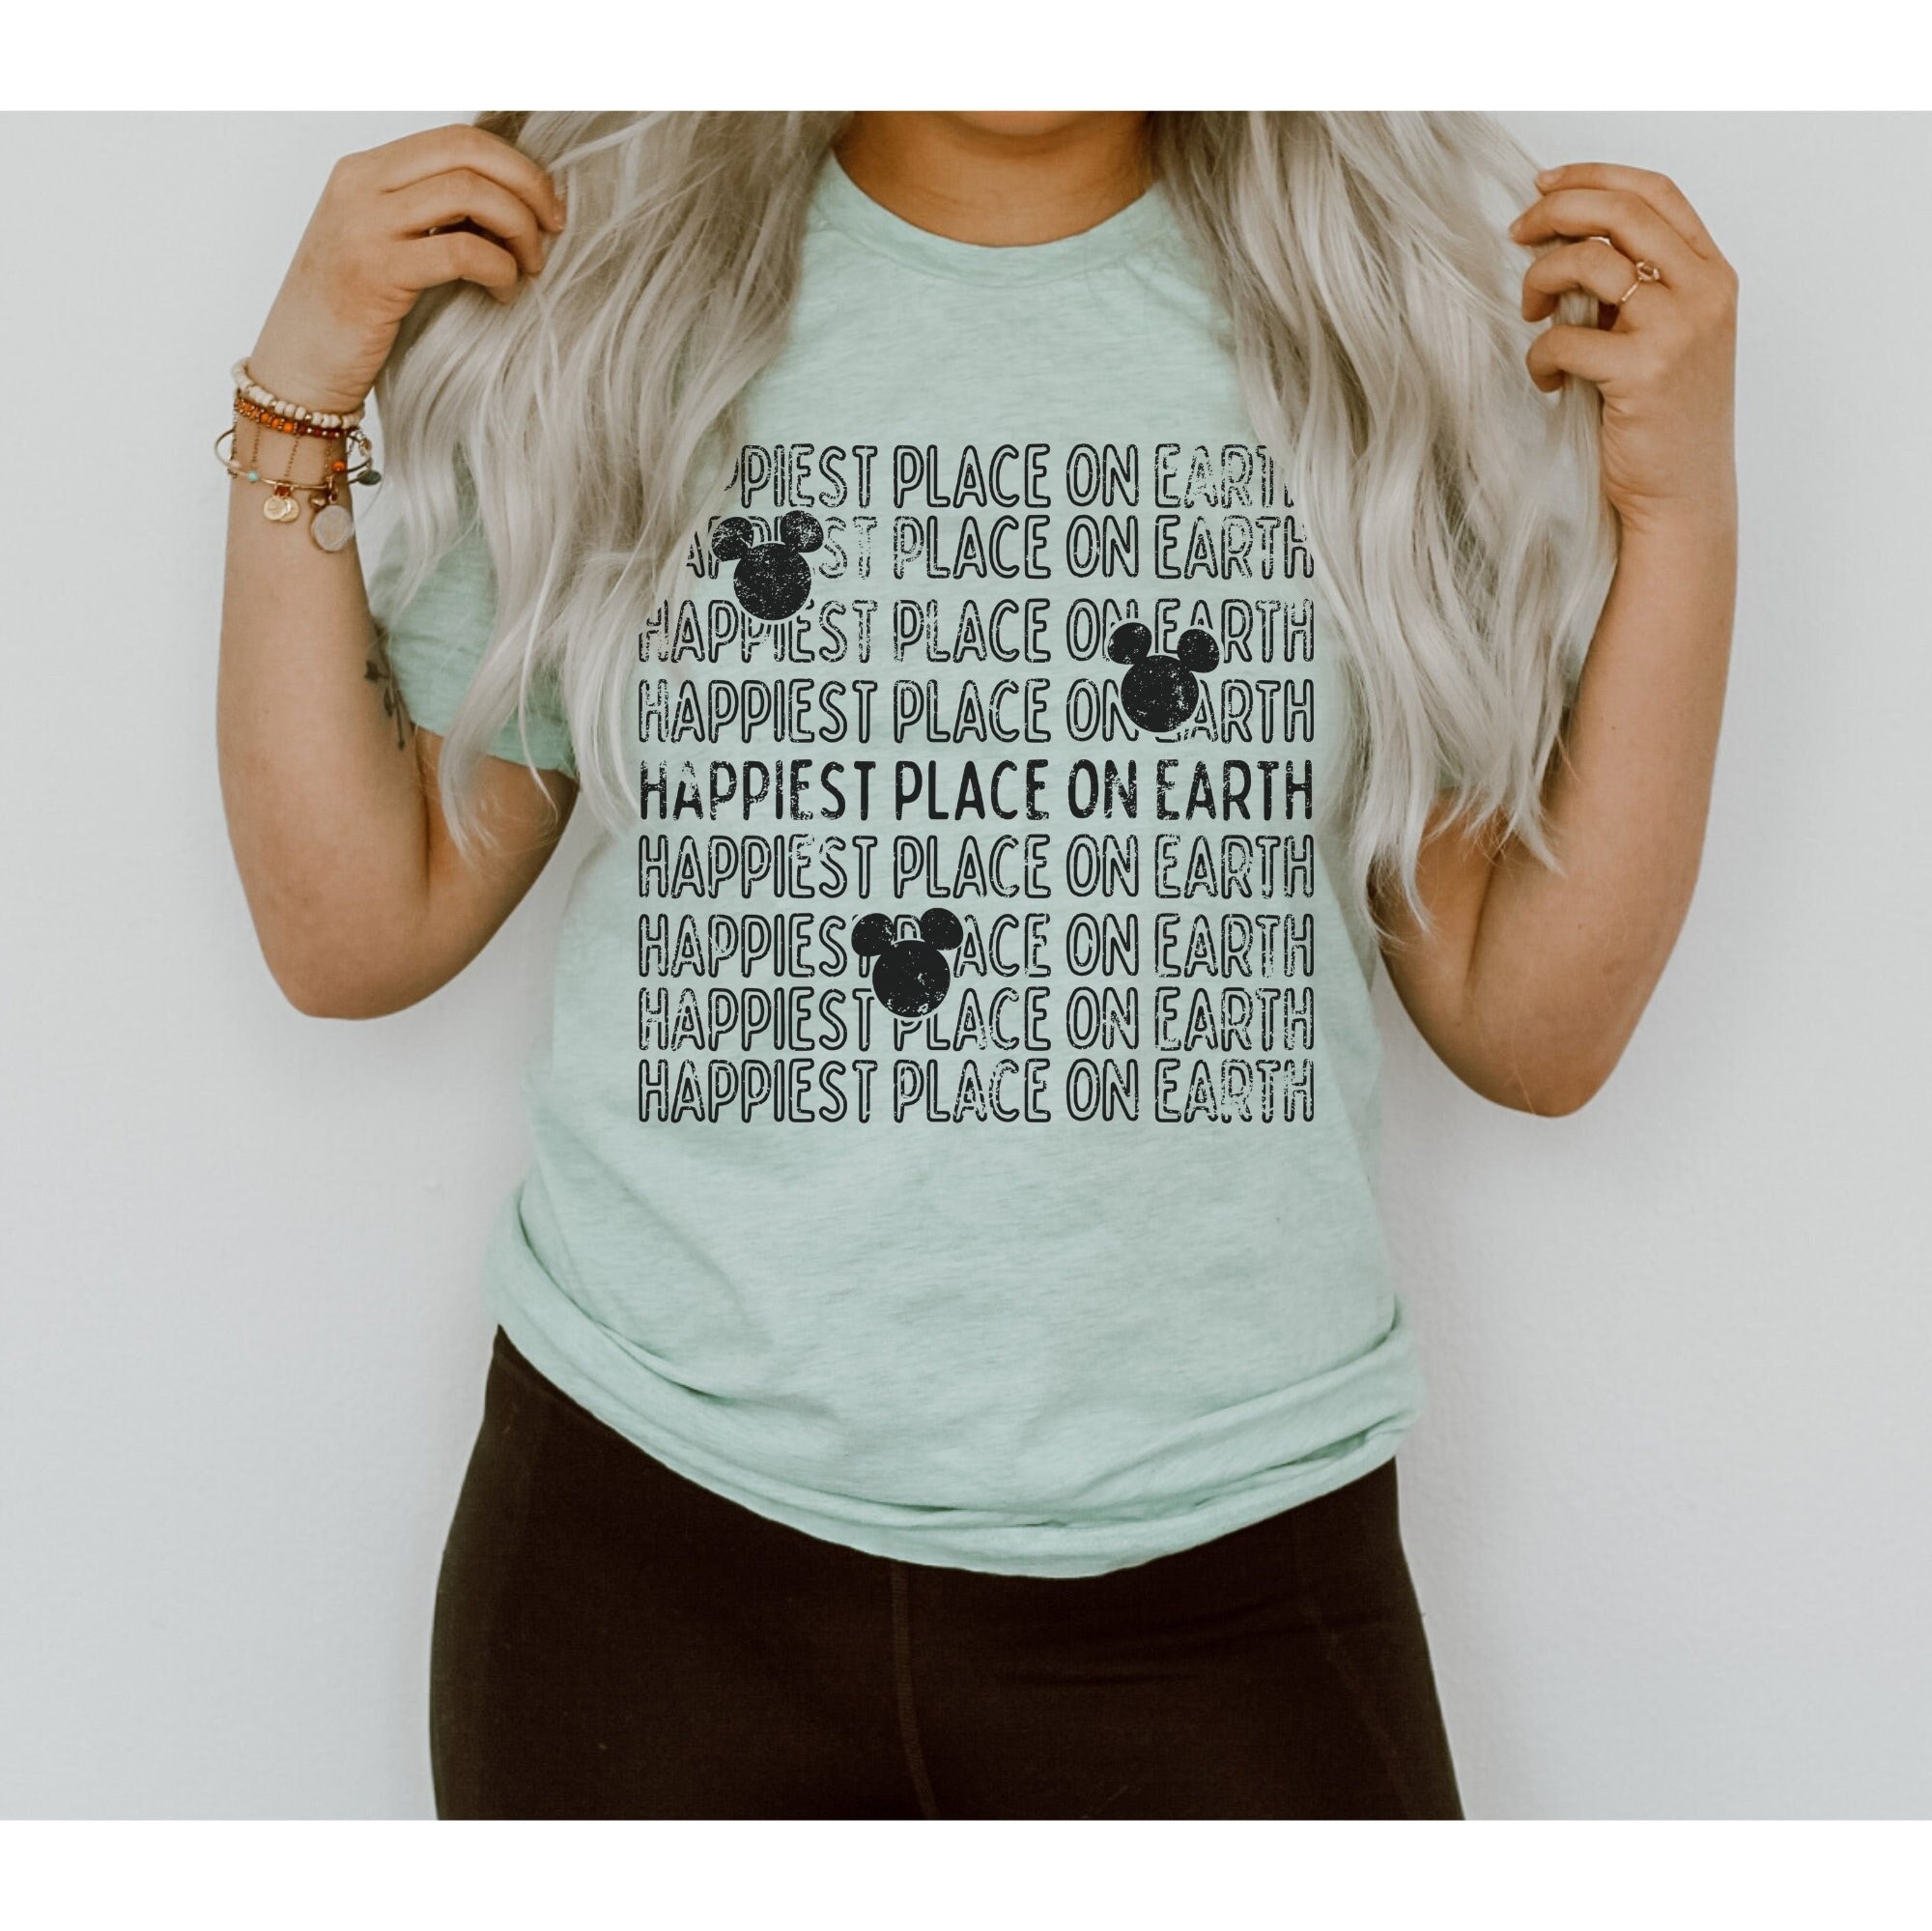 Distressed Graphic Happiest Place on Earth Shirt - Retro Mouse Ears Shirt